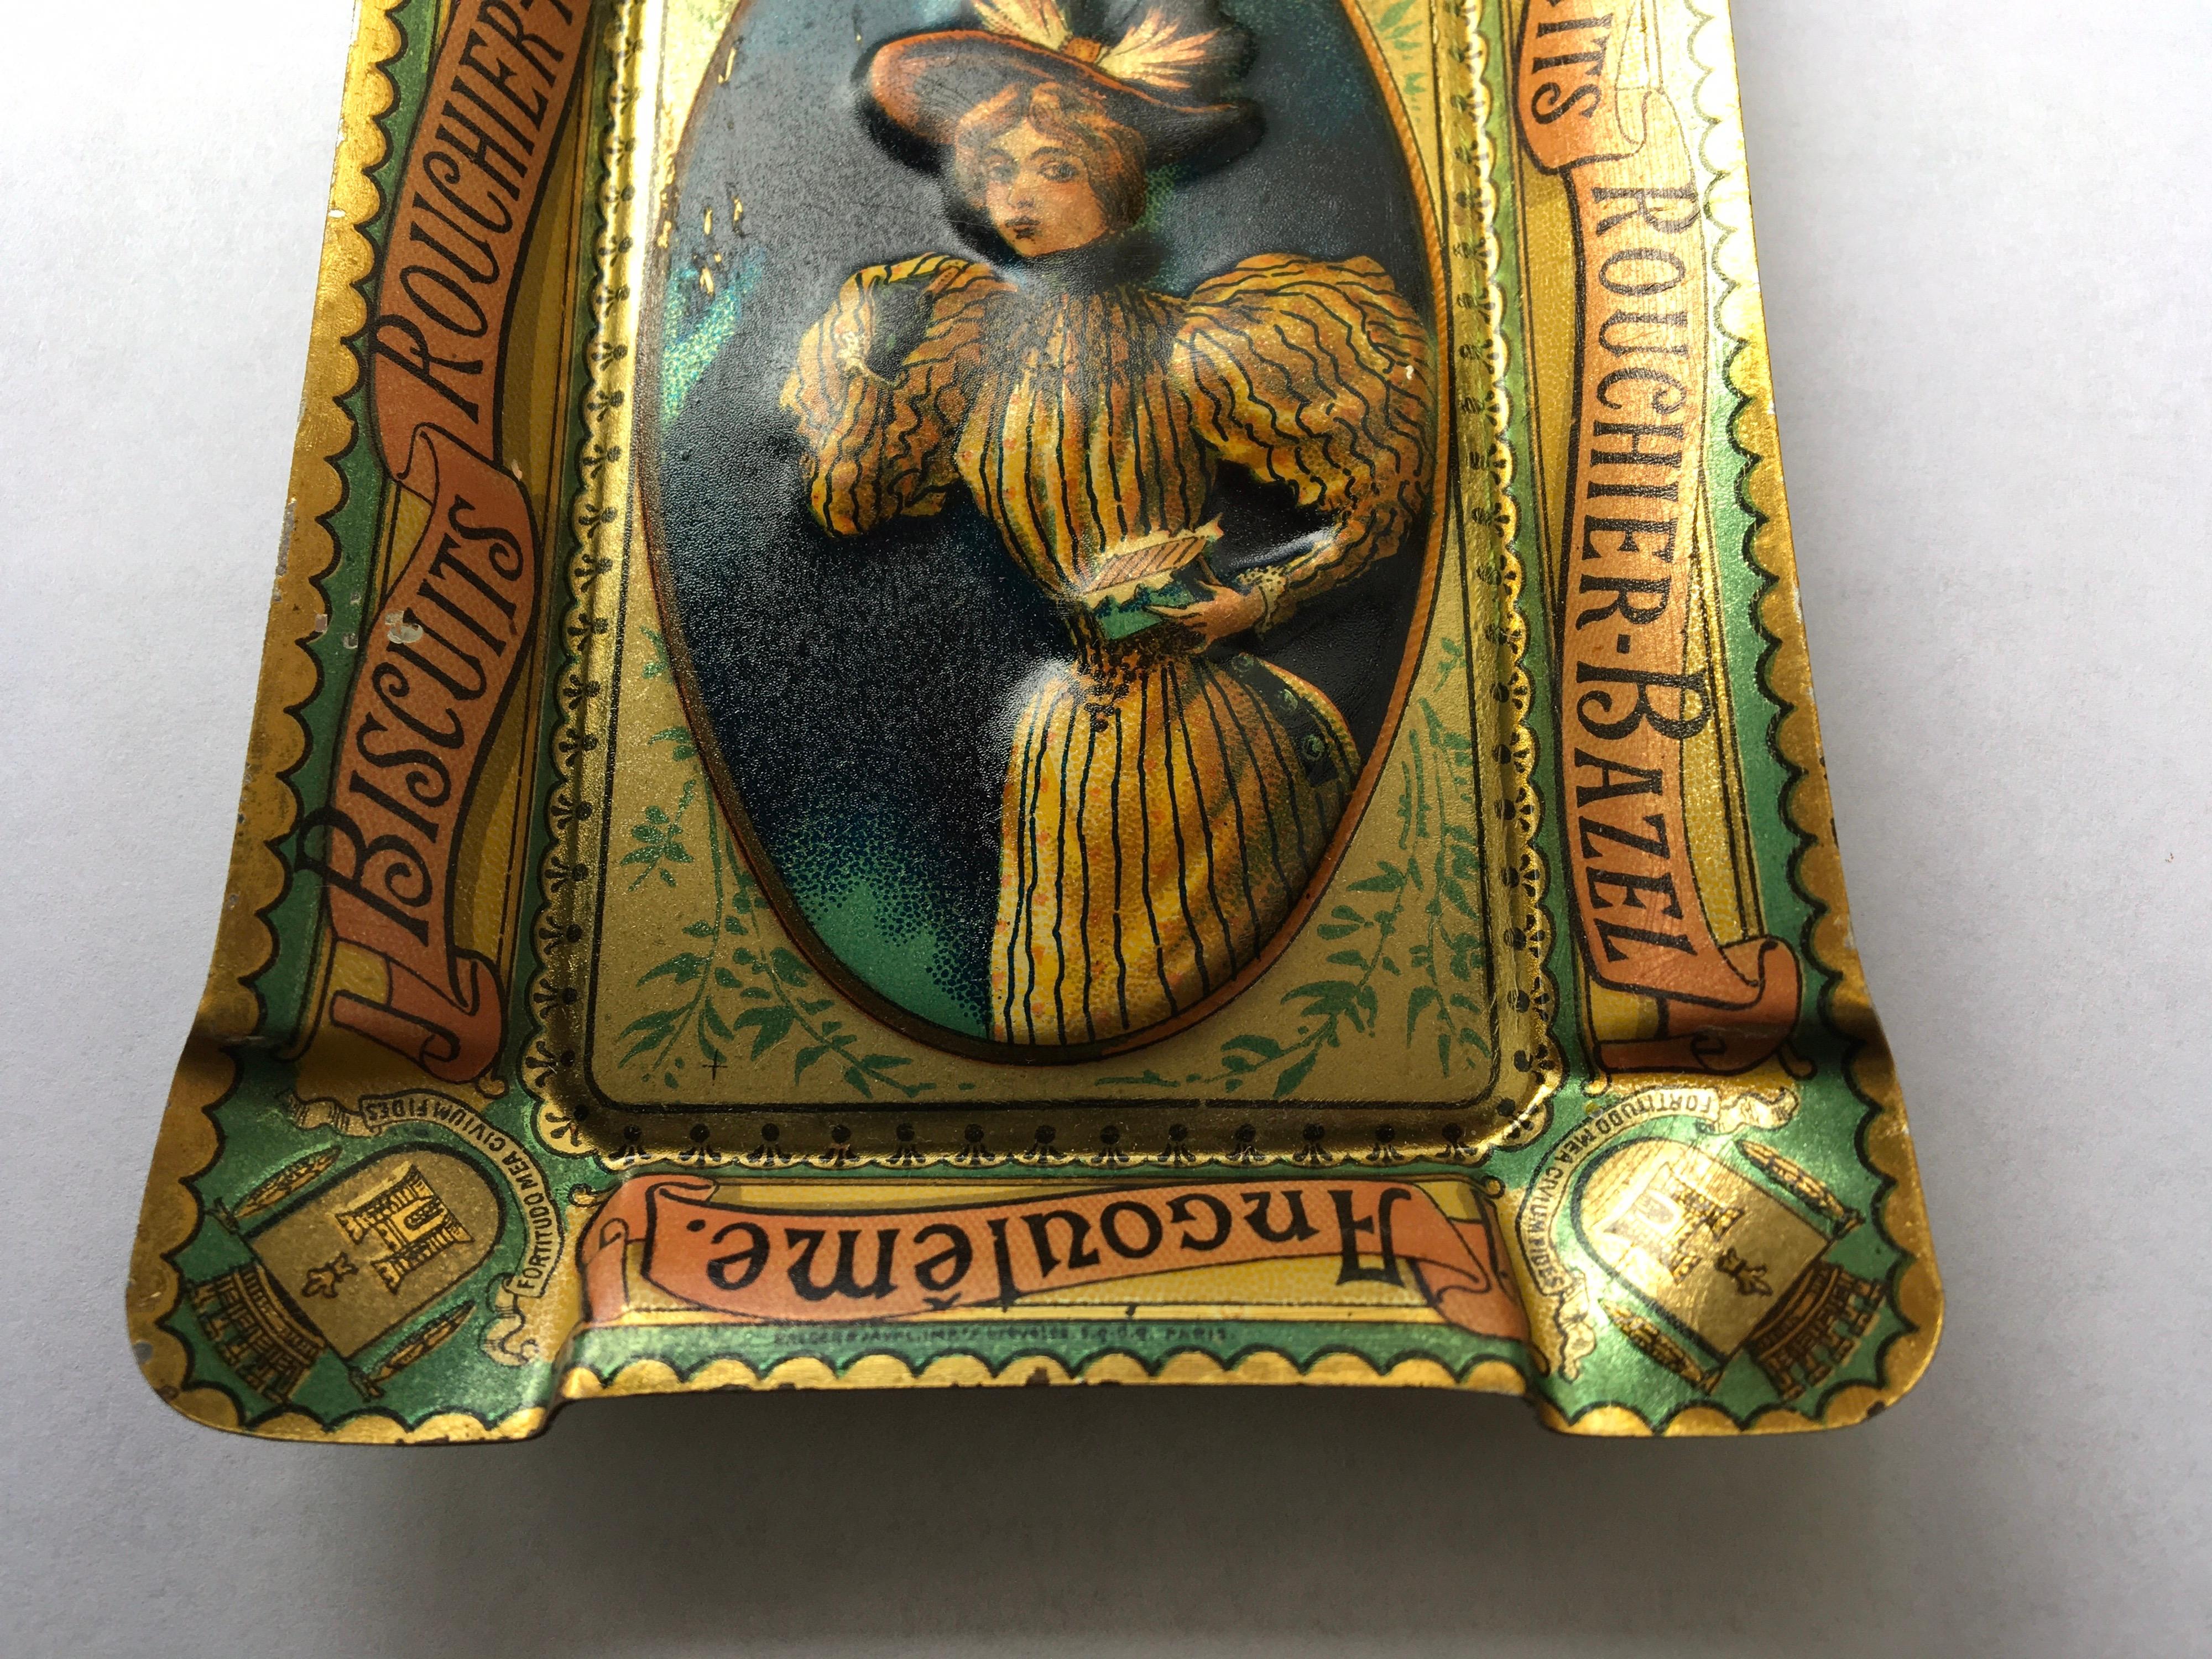 Art Nouveau Antique Litho Tin Tray or Ashtray for Biscuits Rouchier Bazel France, circa 1900